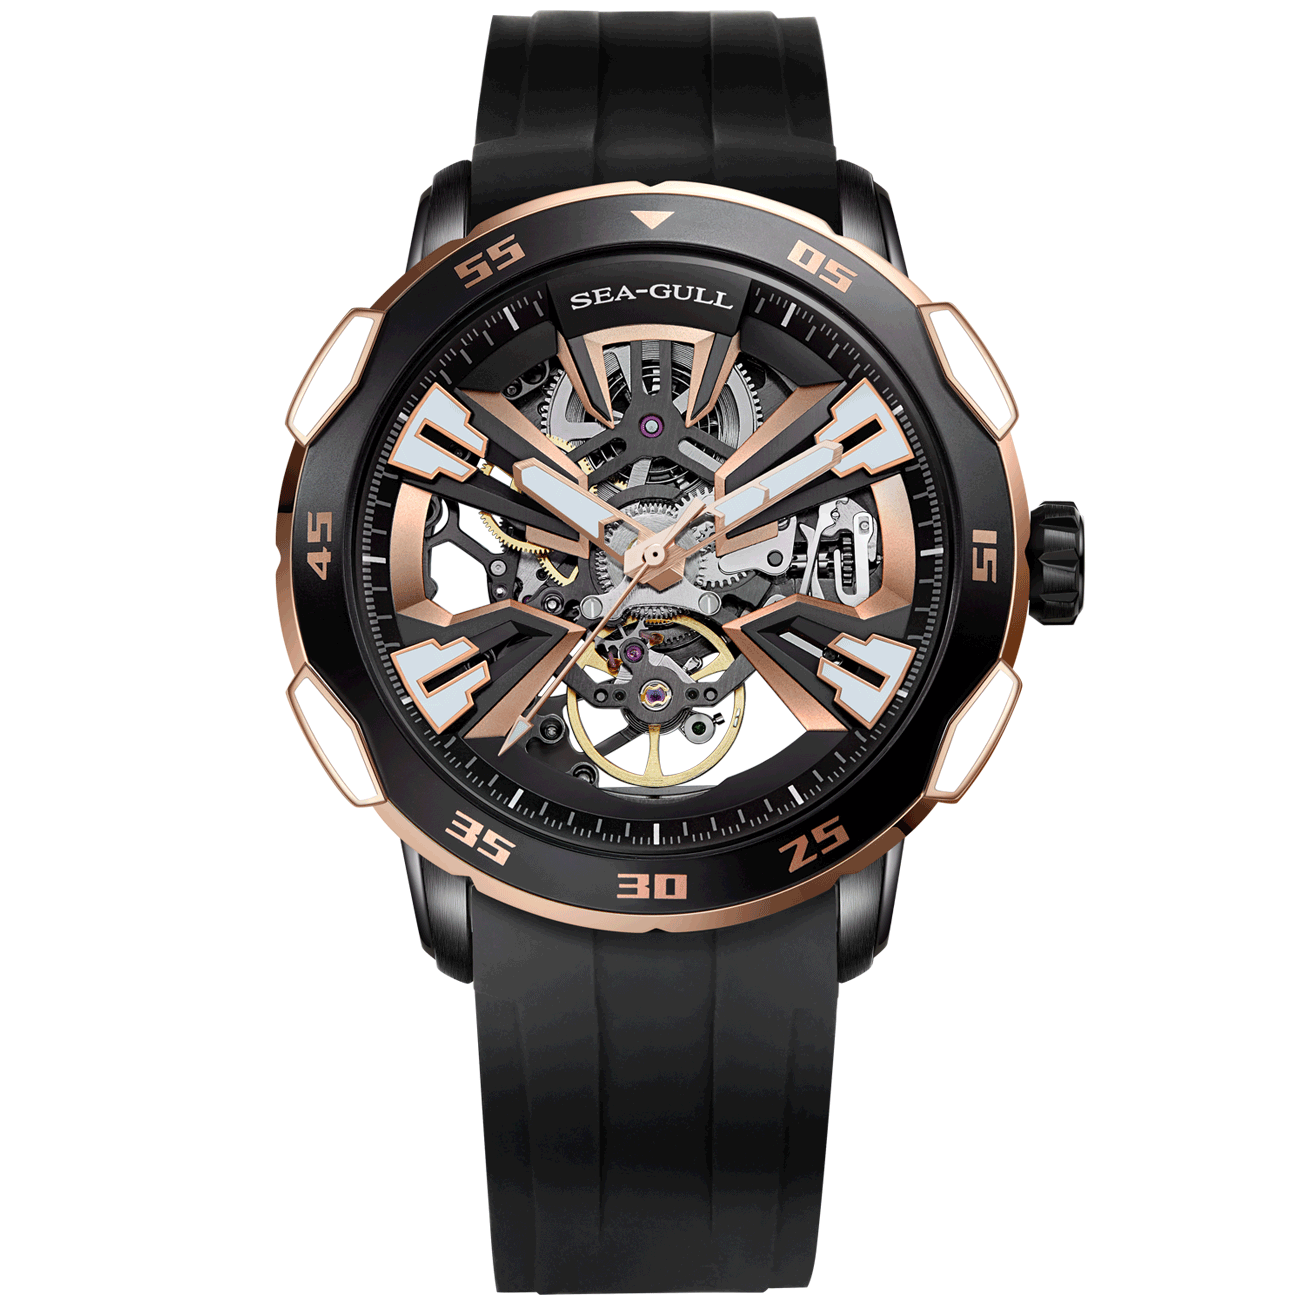 Seagull Watch | Boundary Master V Black Skeleton Automatic Watch 44mm